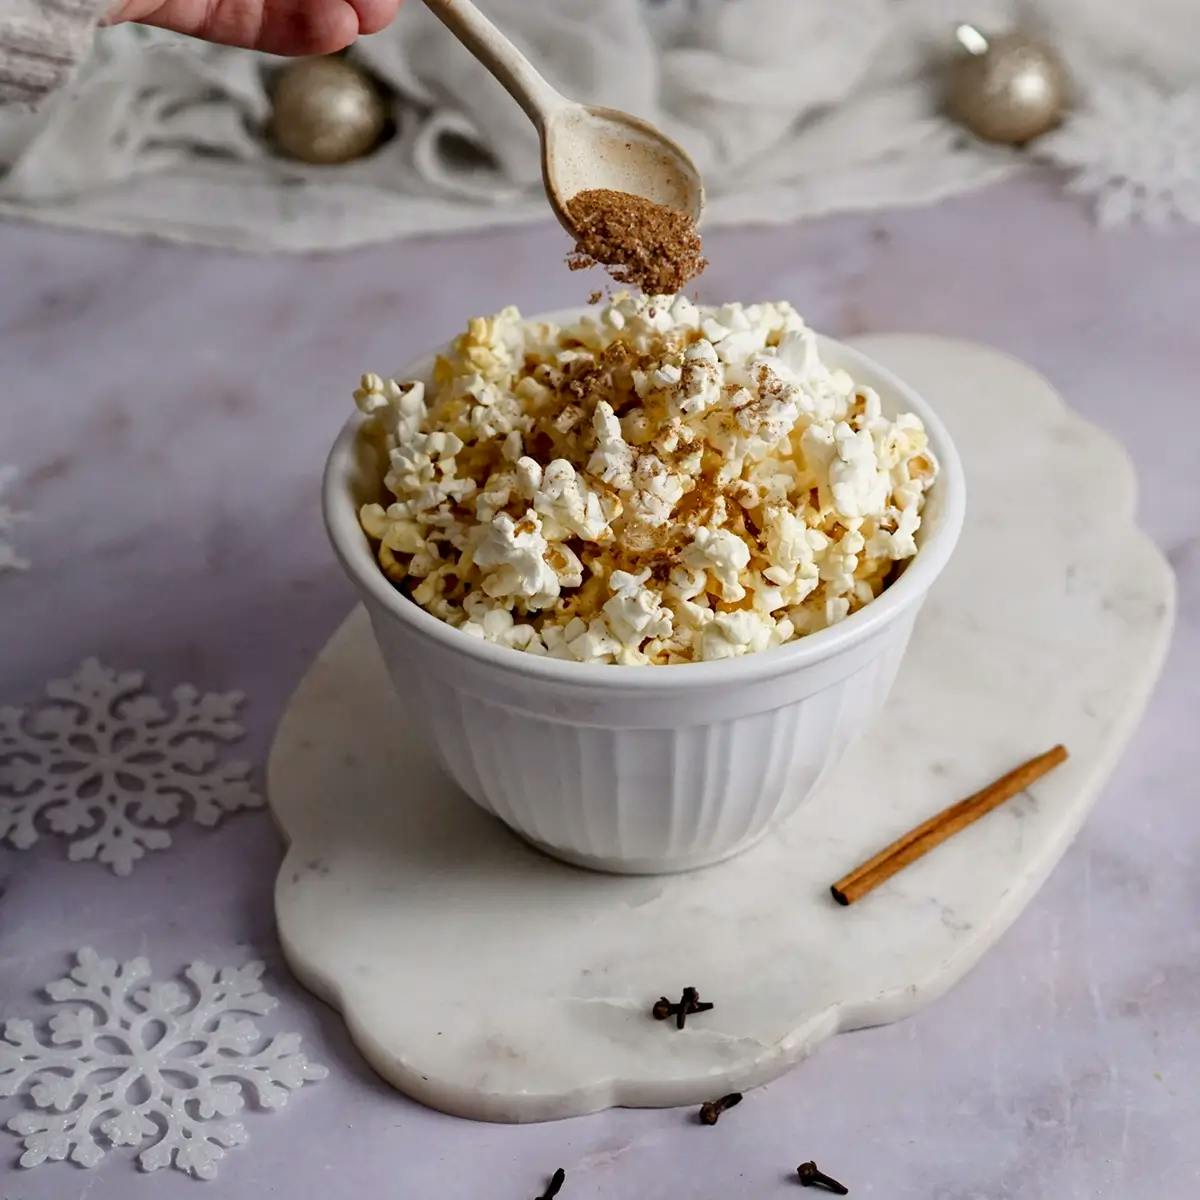 A hand spooning gingerbread spices over the top of a bowl of Christmas popcorn.